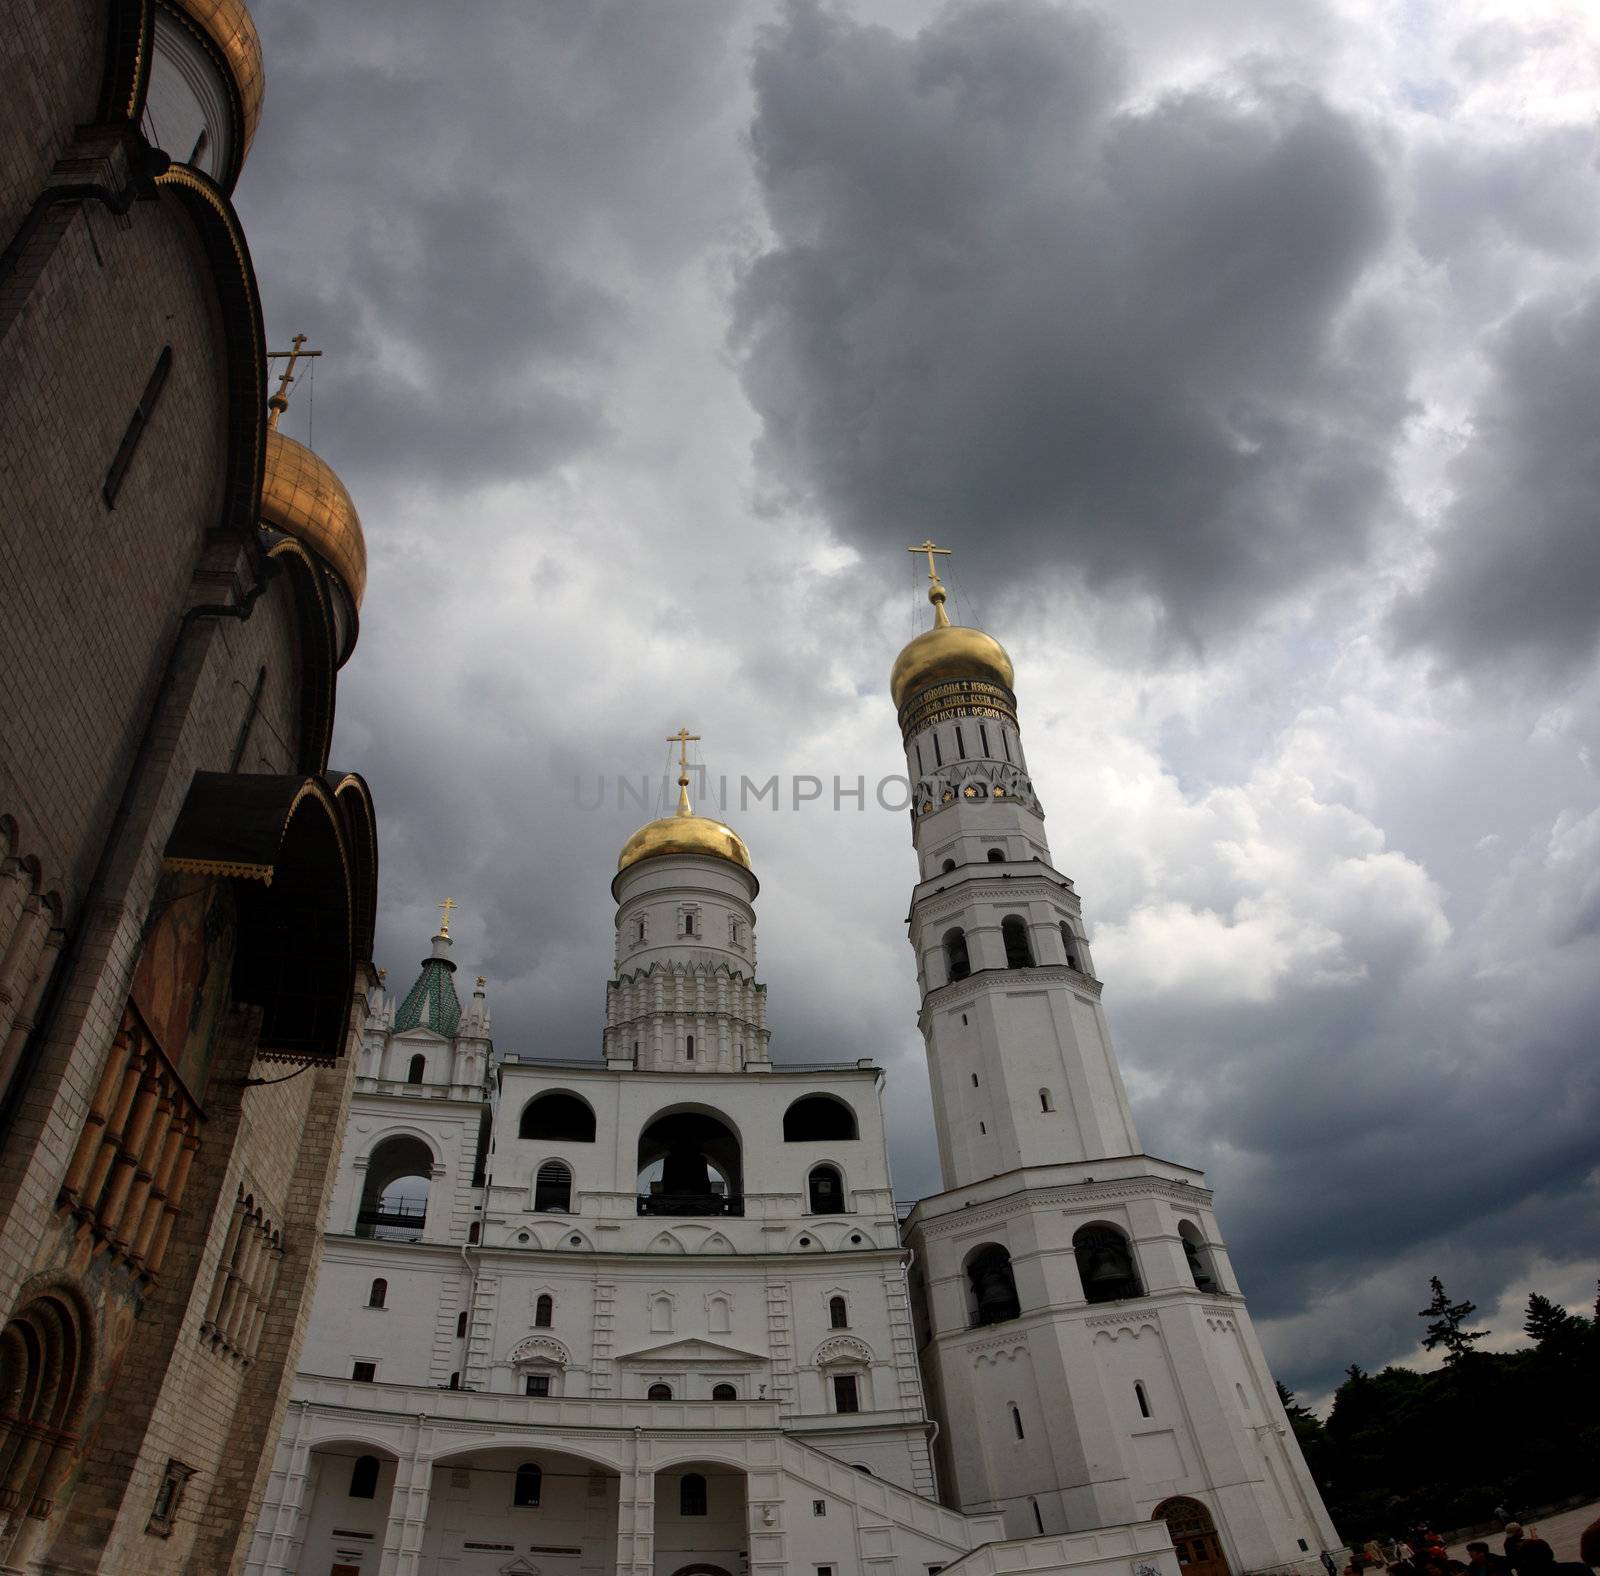  traditional, ivan, terrible, bell, tower, belfry, touris, square, the, kremlin, moscow, city, people, sky, dense, heavy, thick, clouds, cupola, dome, christianity, cross, russia, architecture, building, religion